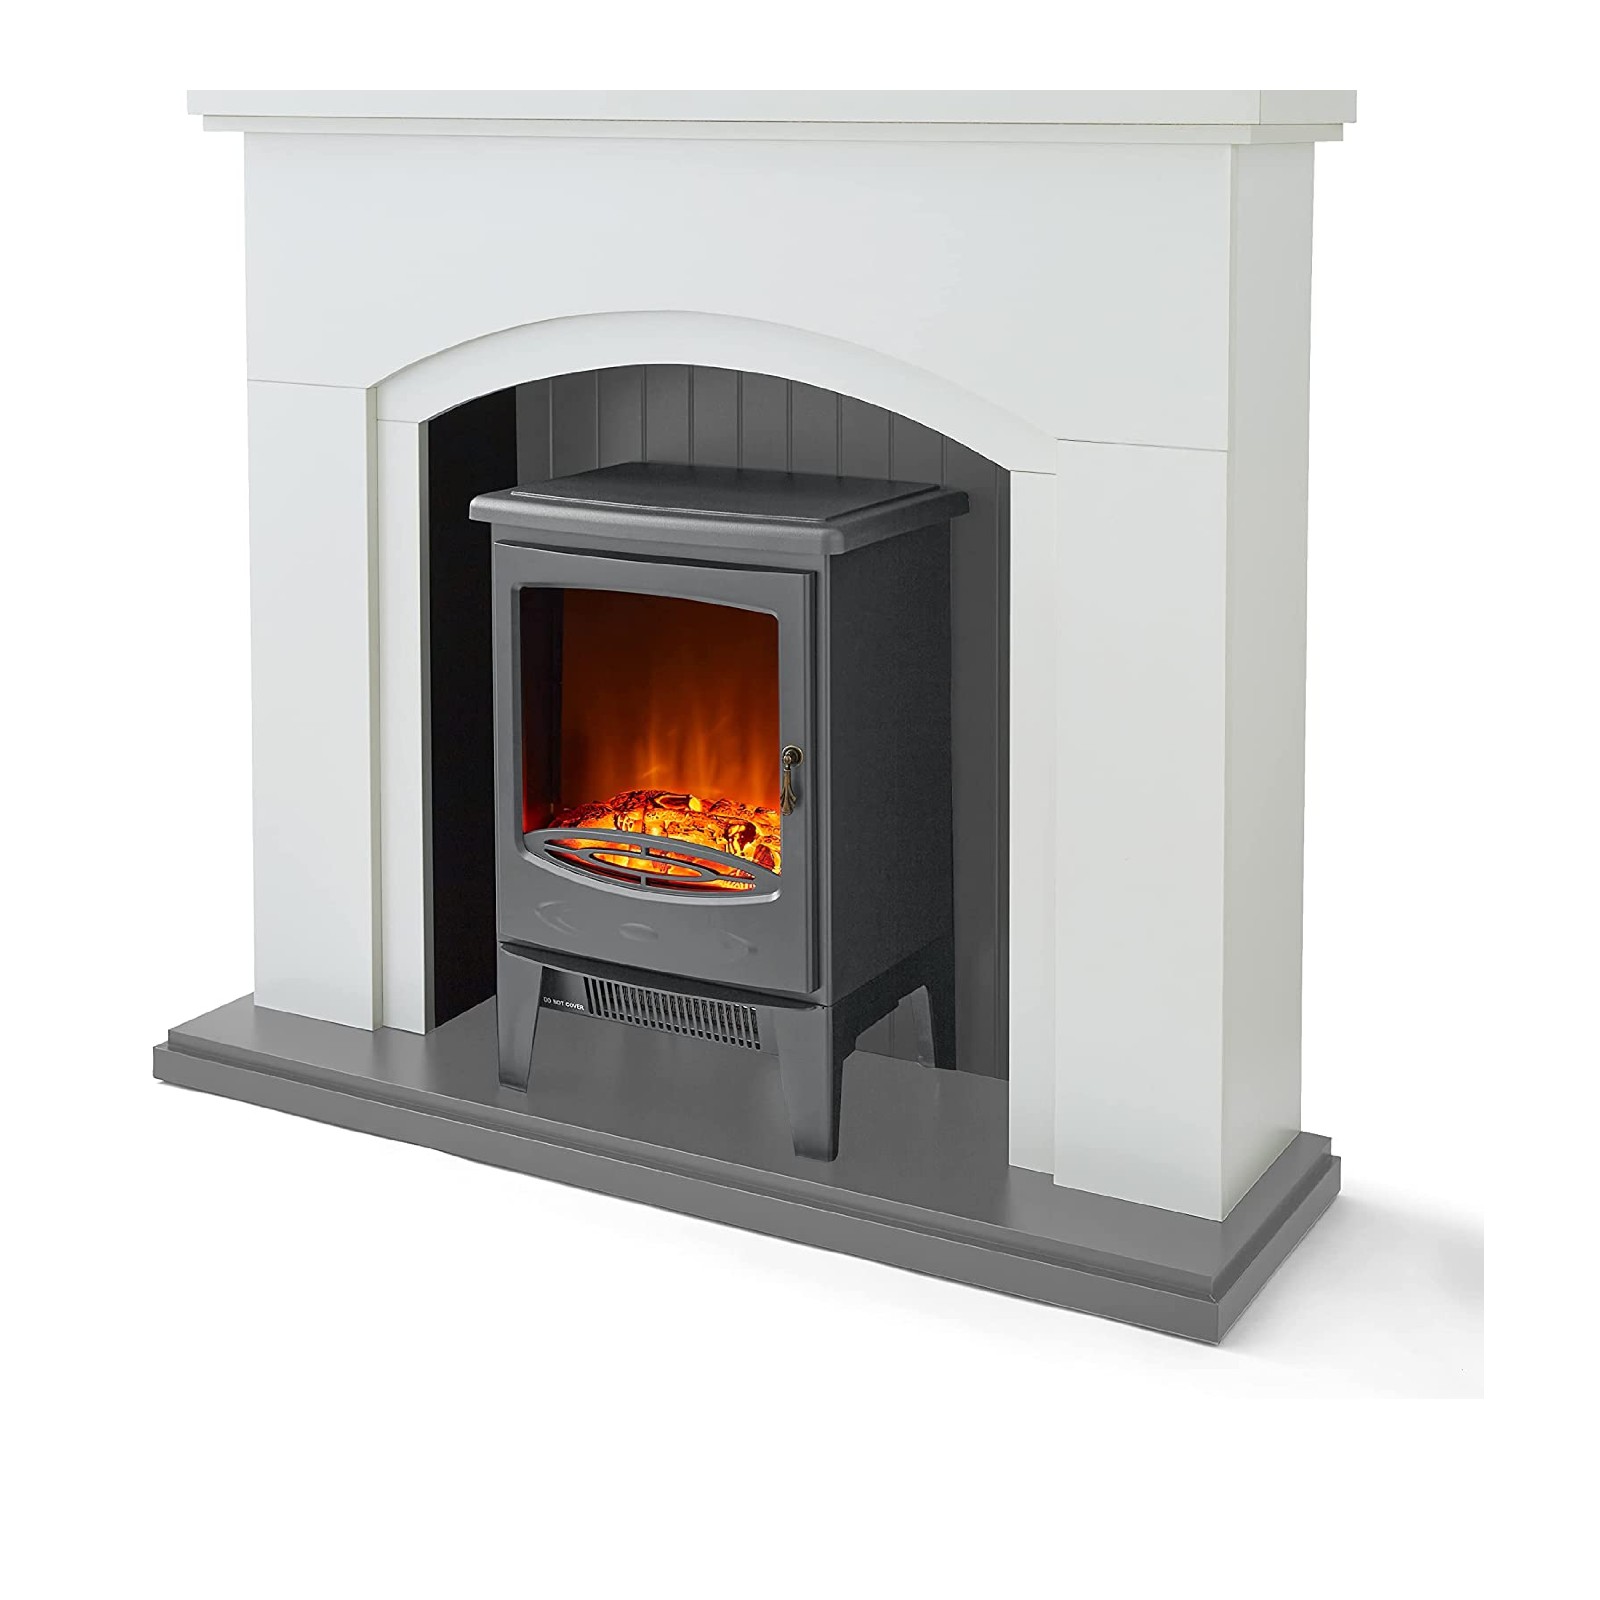 Fireplace Suite with Two Heat Settings and an Adjustable Thermostat, 1850W, Grey and Black